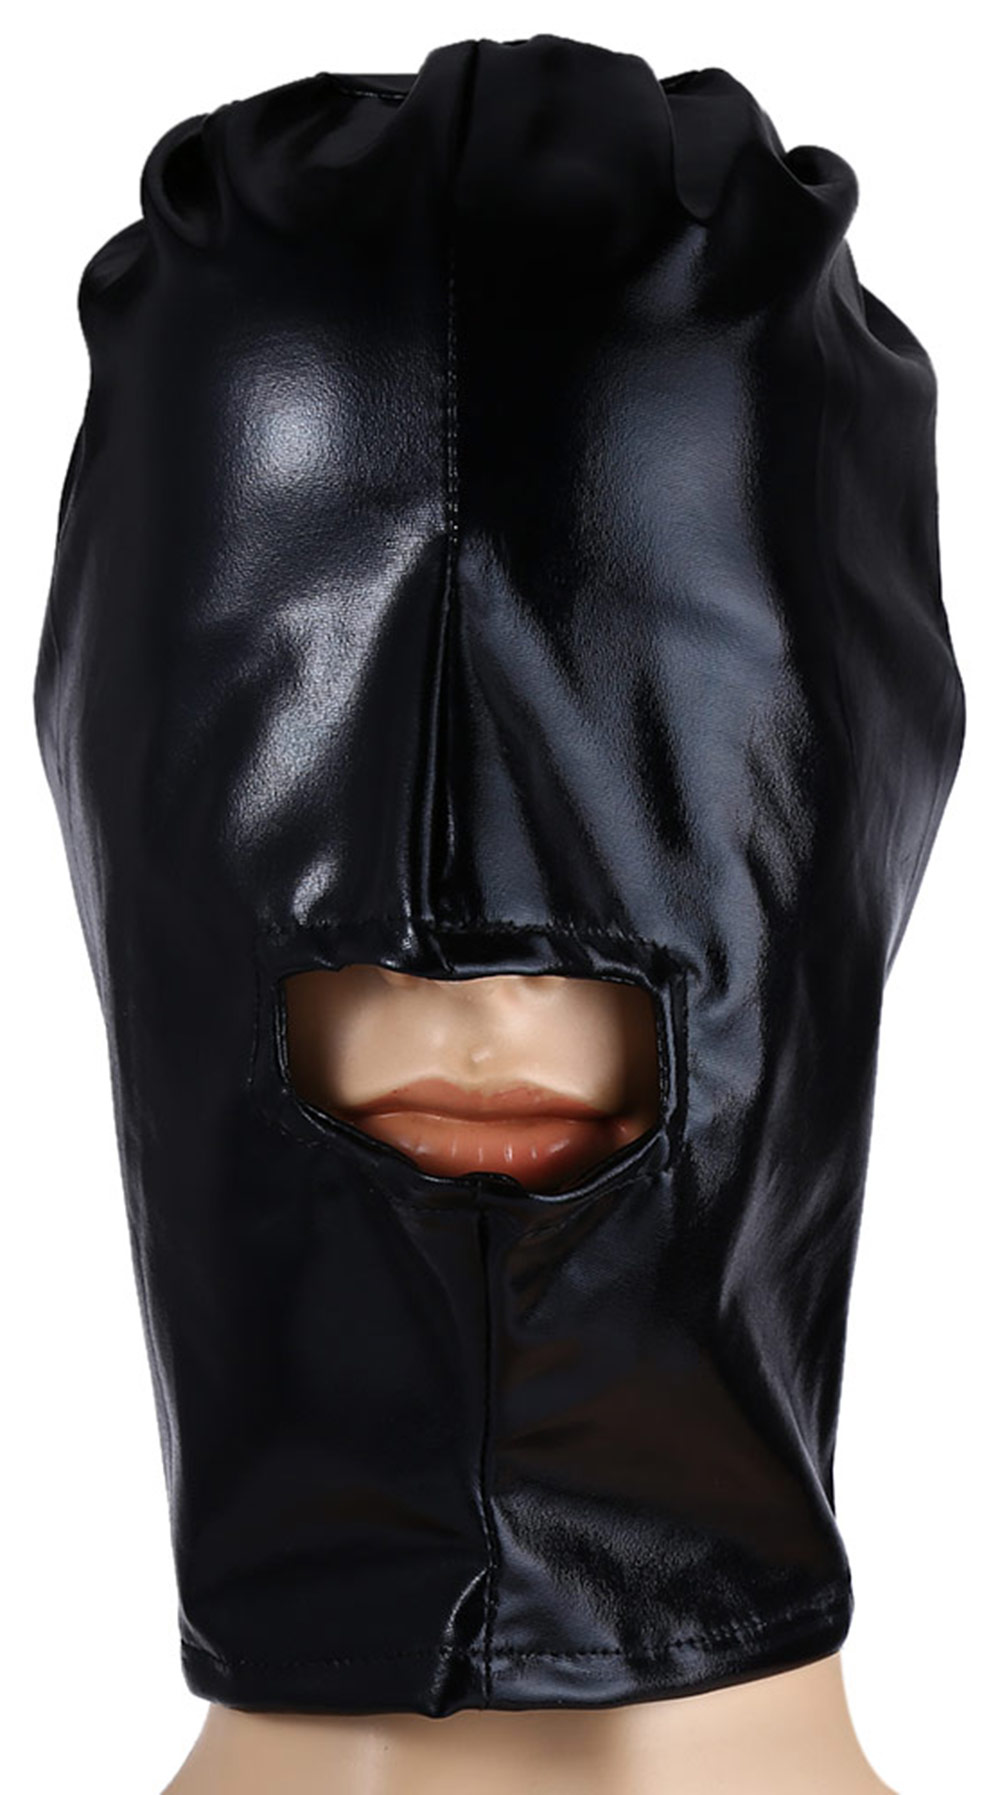 SM Adult Sex Game Toy Mask Hood Cap Spandex Cosplay with Air Hole- Black